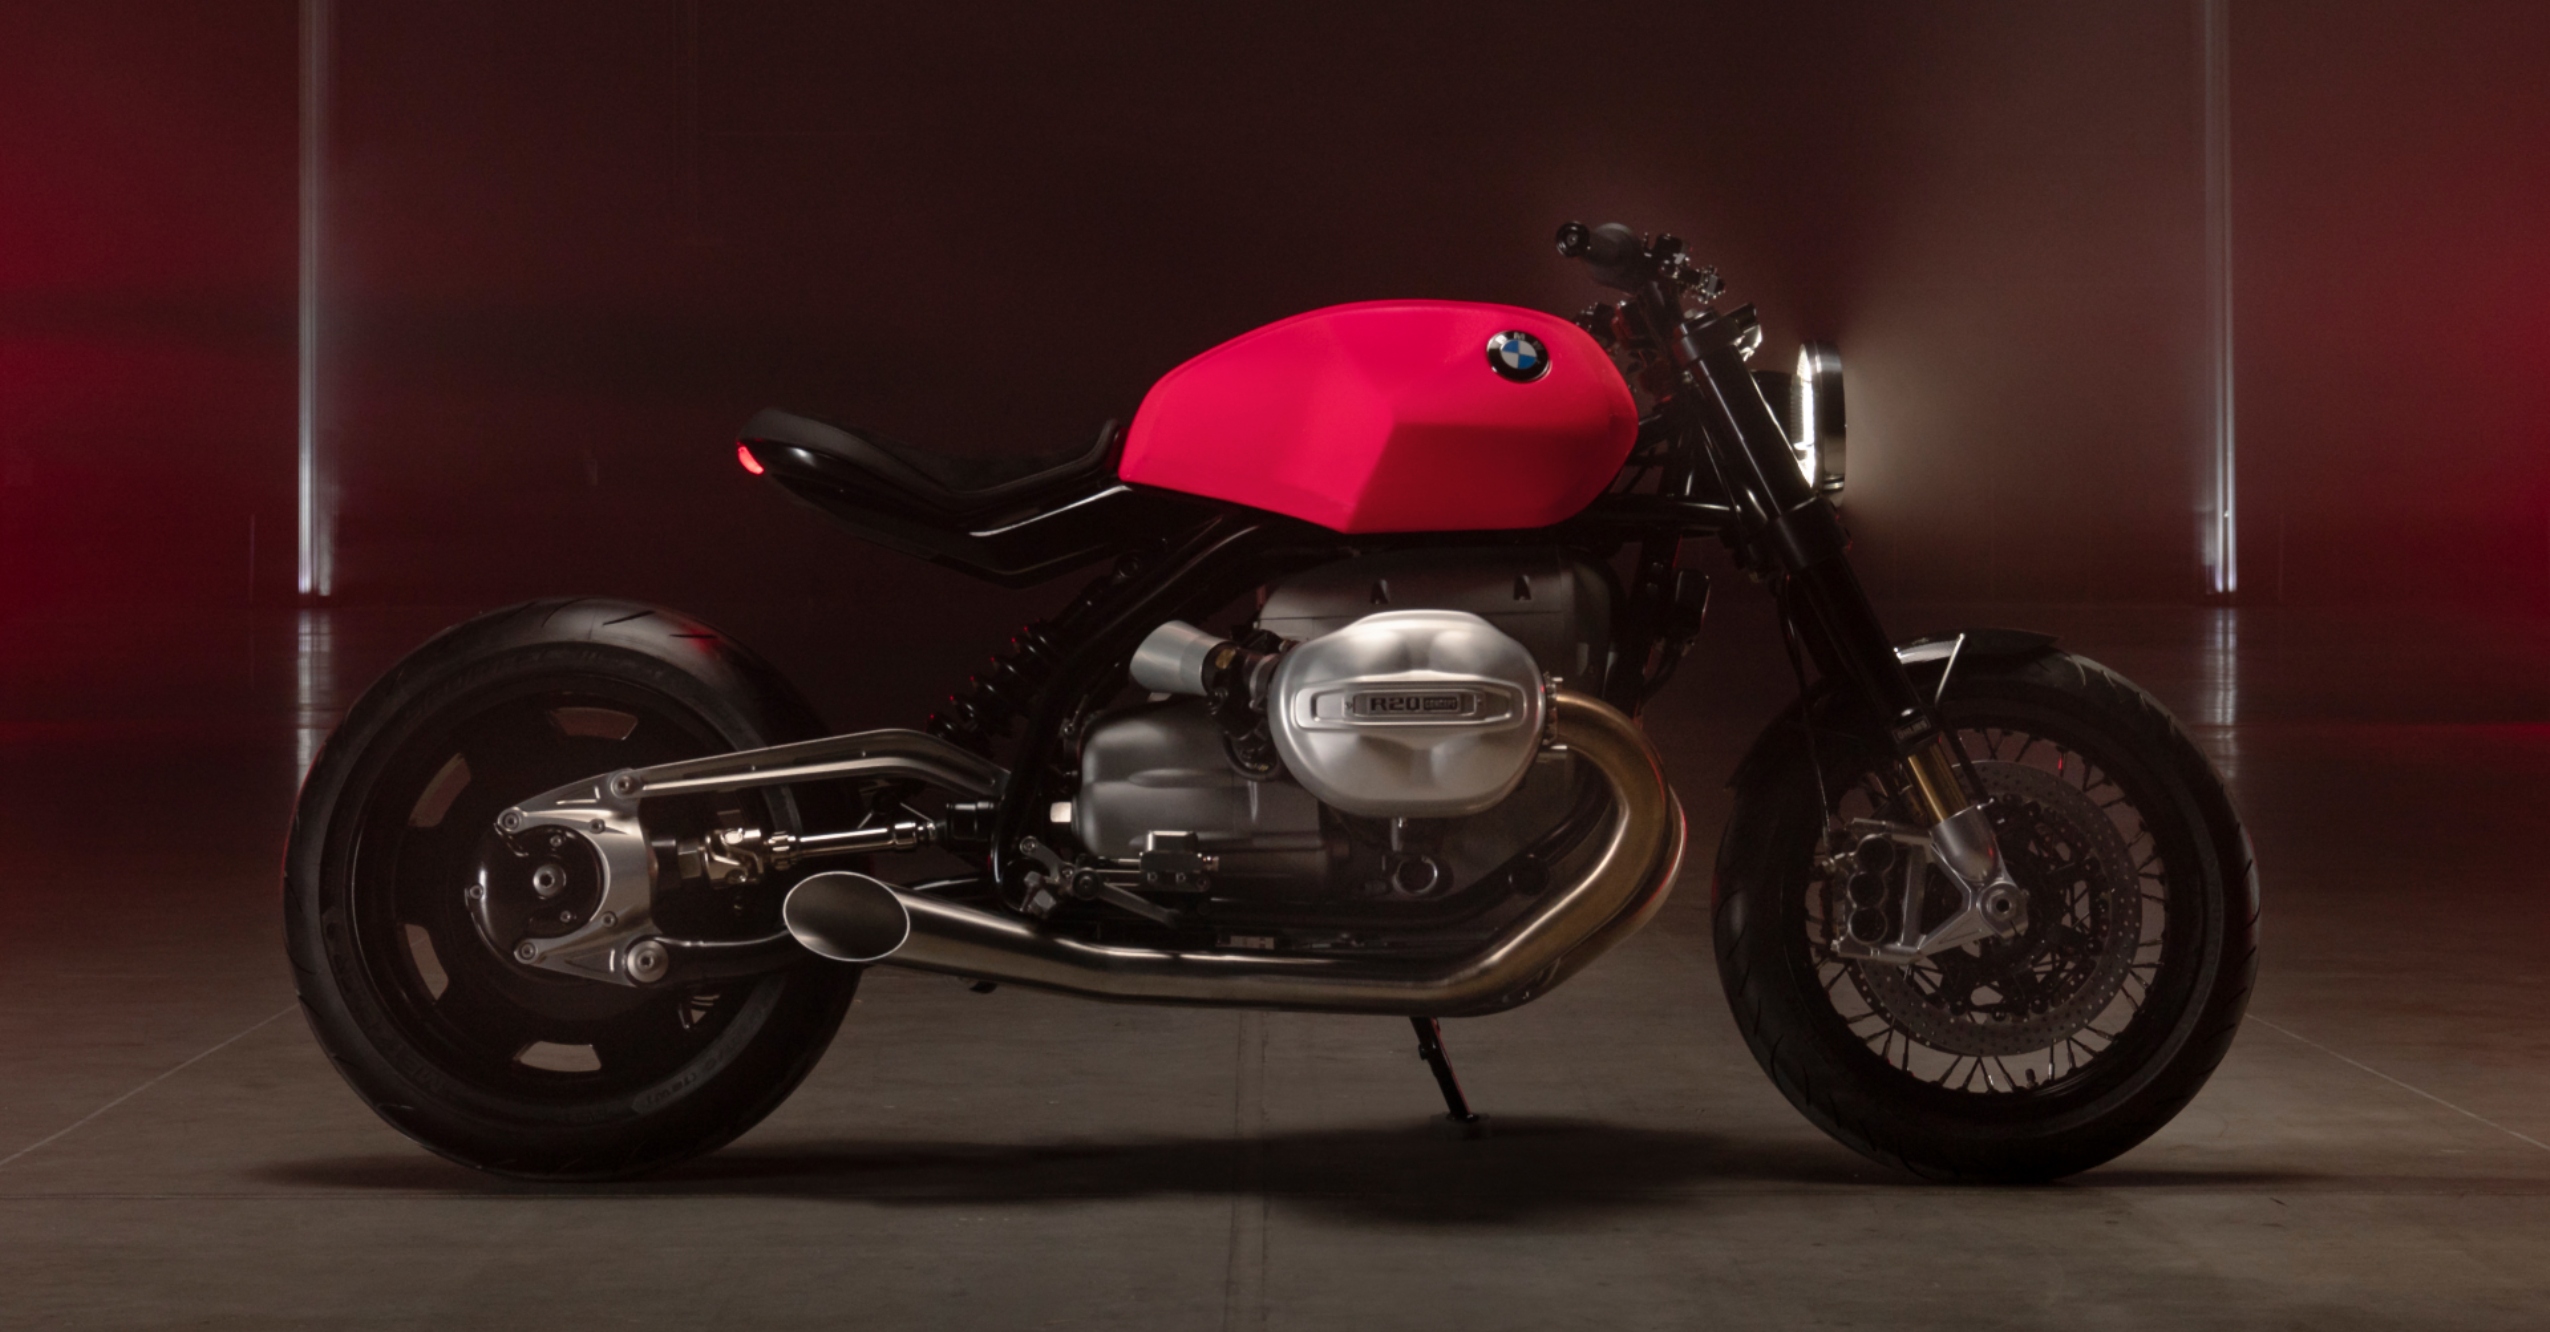 The BMW R20 Concept Is A Beastly 2.0-Liter Naked Bike